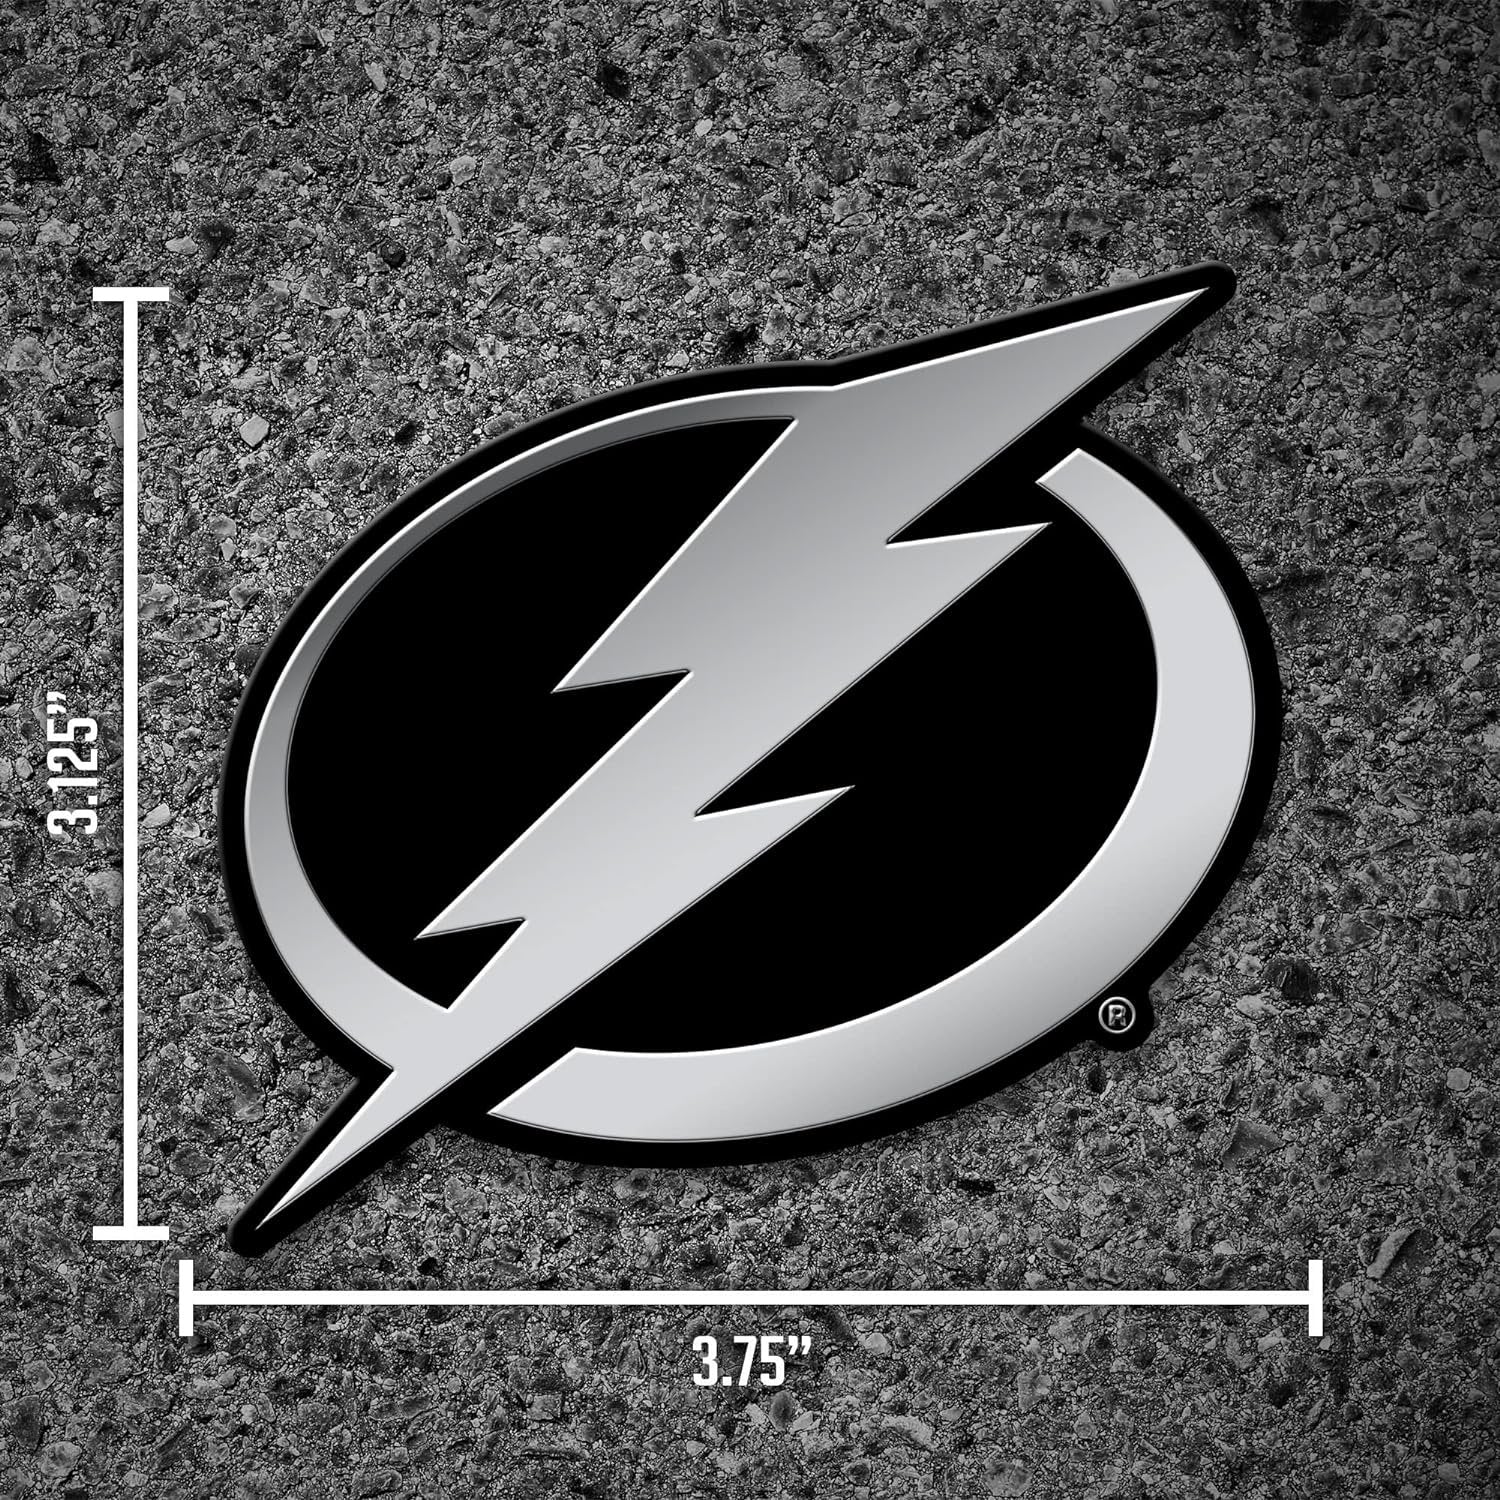 Tampa Bay Lightning Auto Emblem, Silver Chrome Color, Raised Molded Plastic, 3.5 Inch, Adhesive Tape Backing